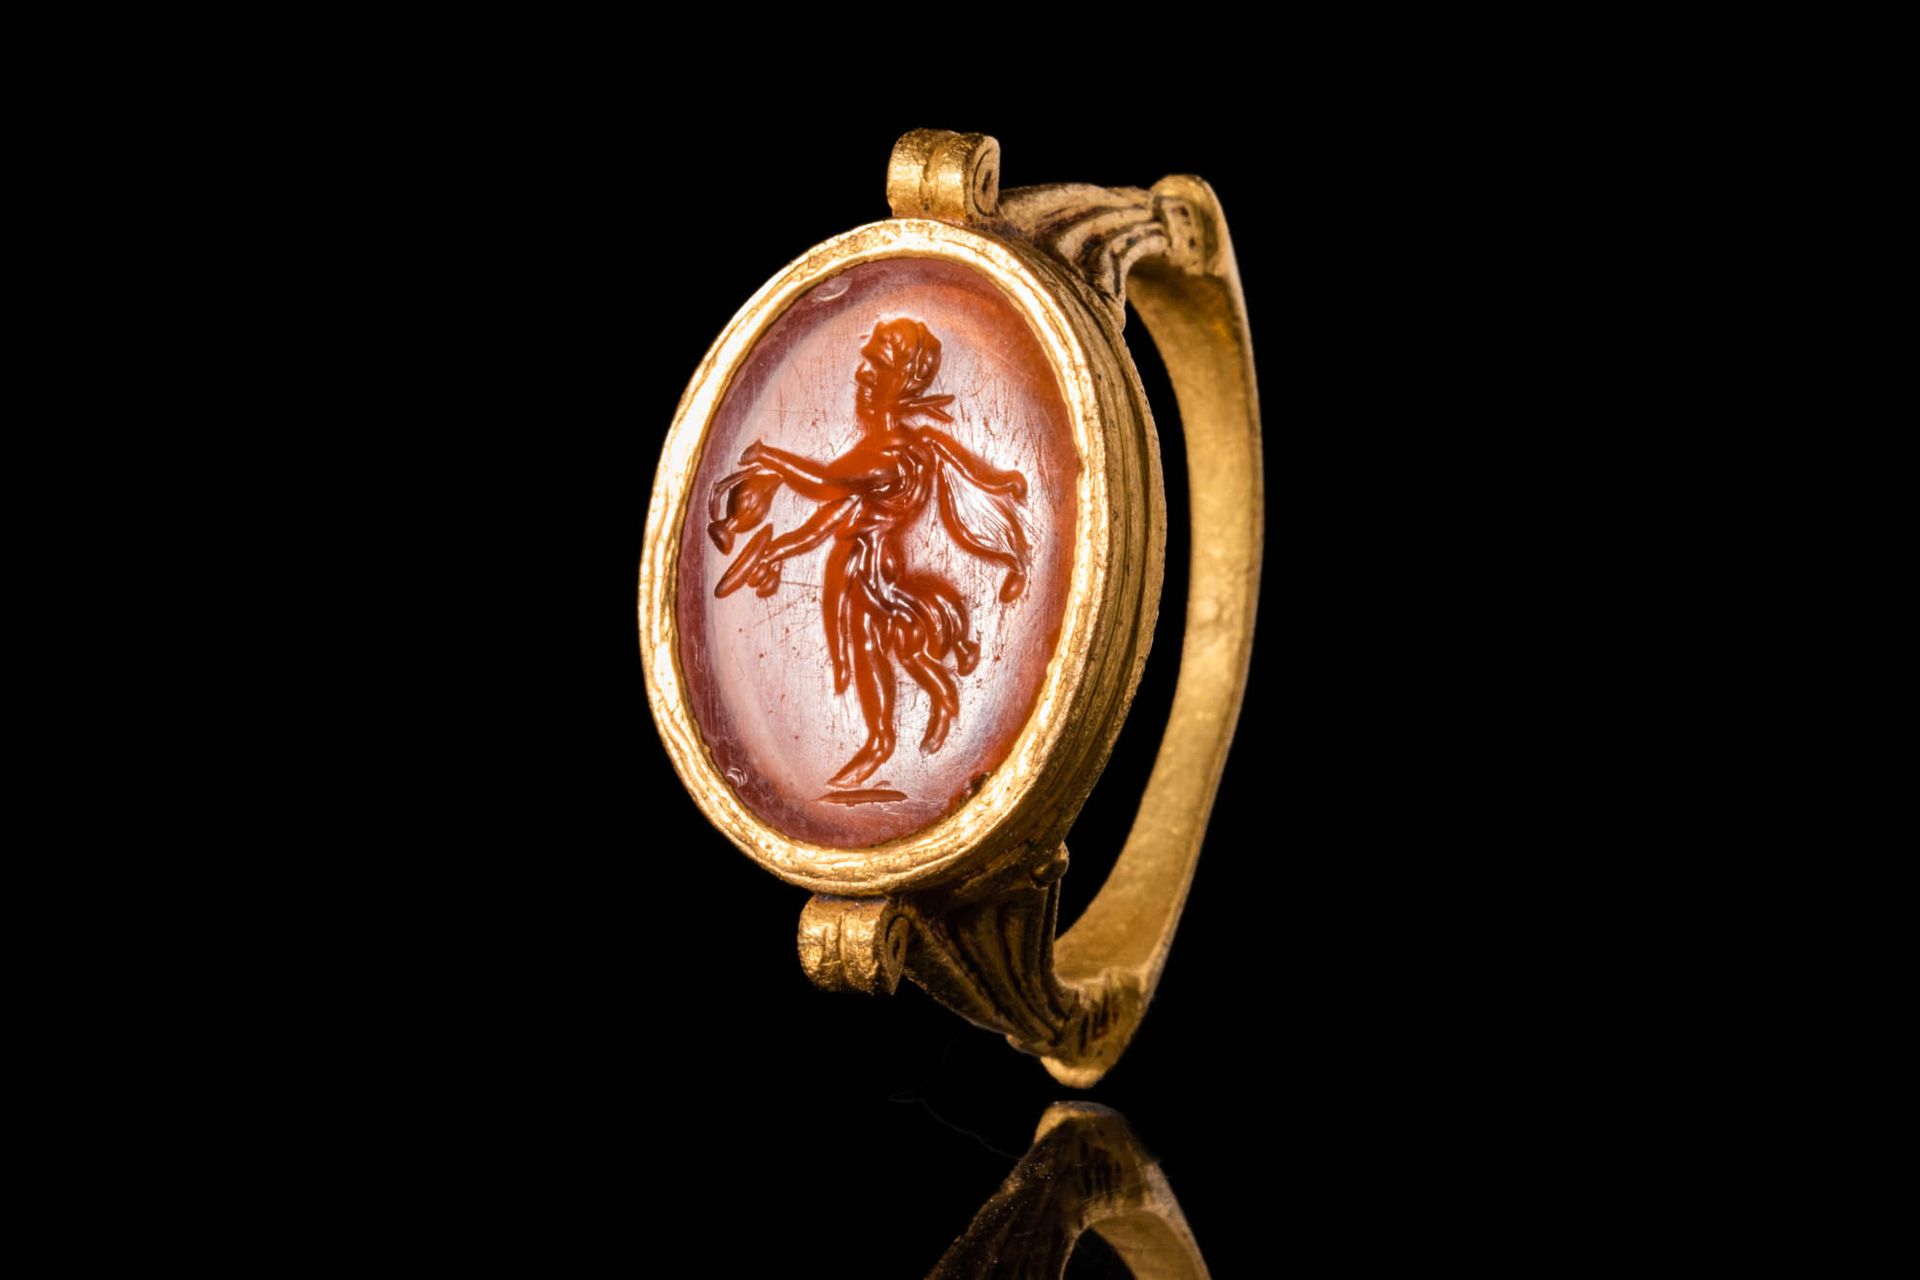 LATE ROMAN GOLD RING WITH INTAGLIO DEPICTING A SATYR Ca. AD 200 - 300.
Ein spätr&hellip;